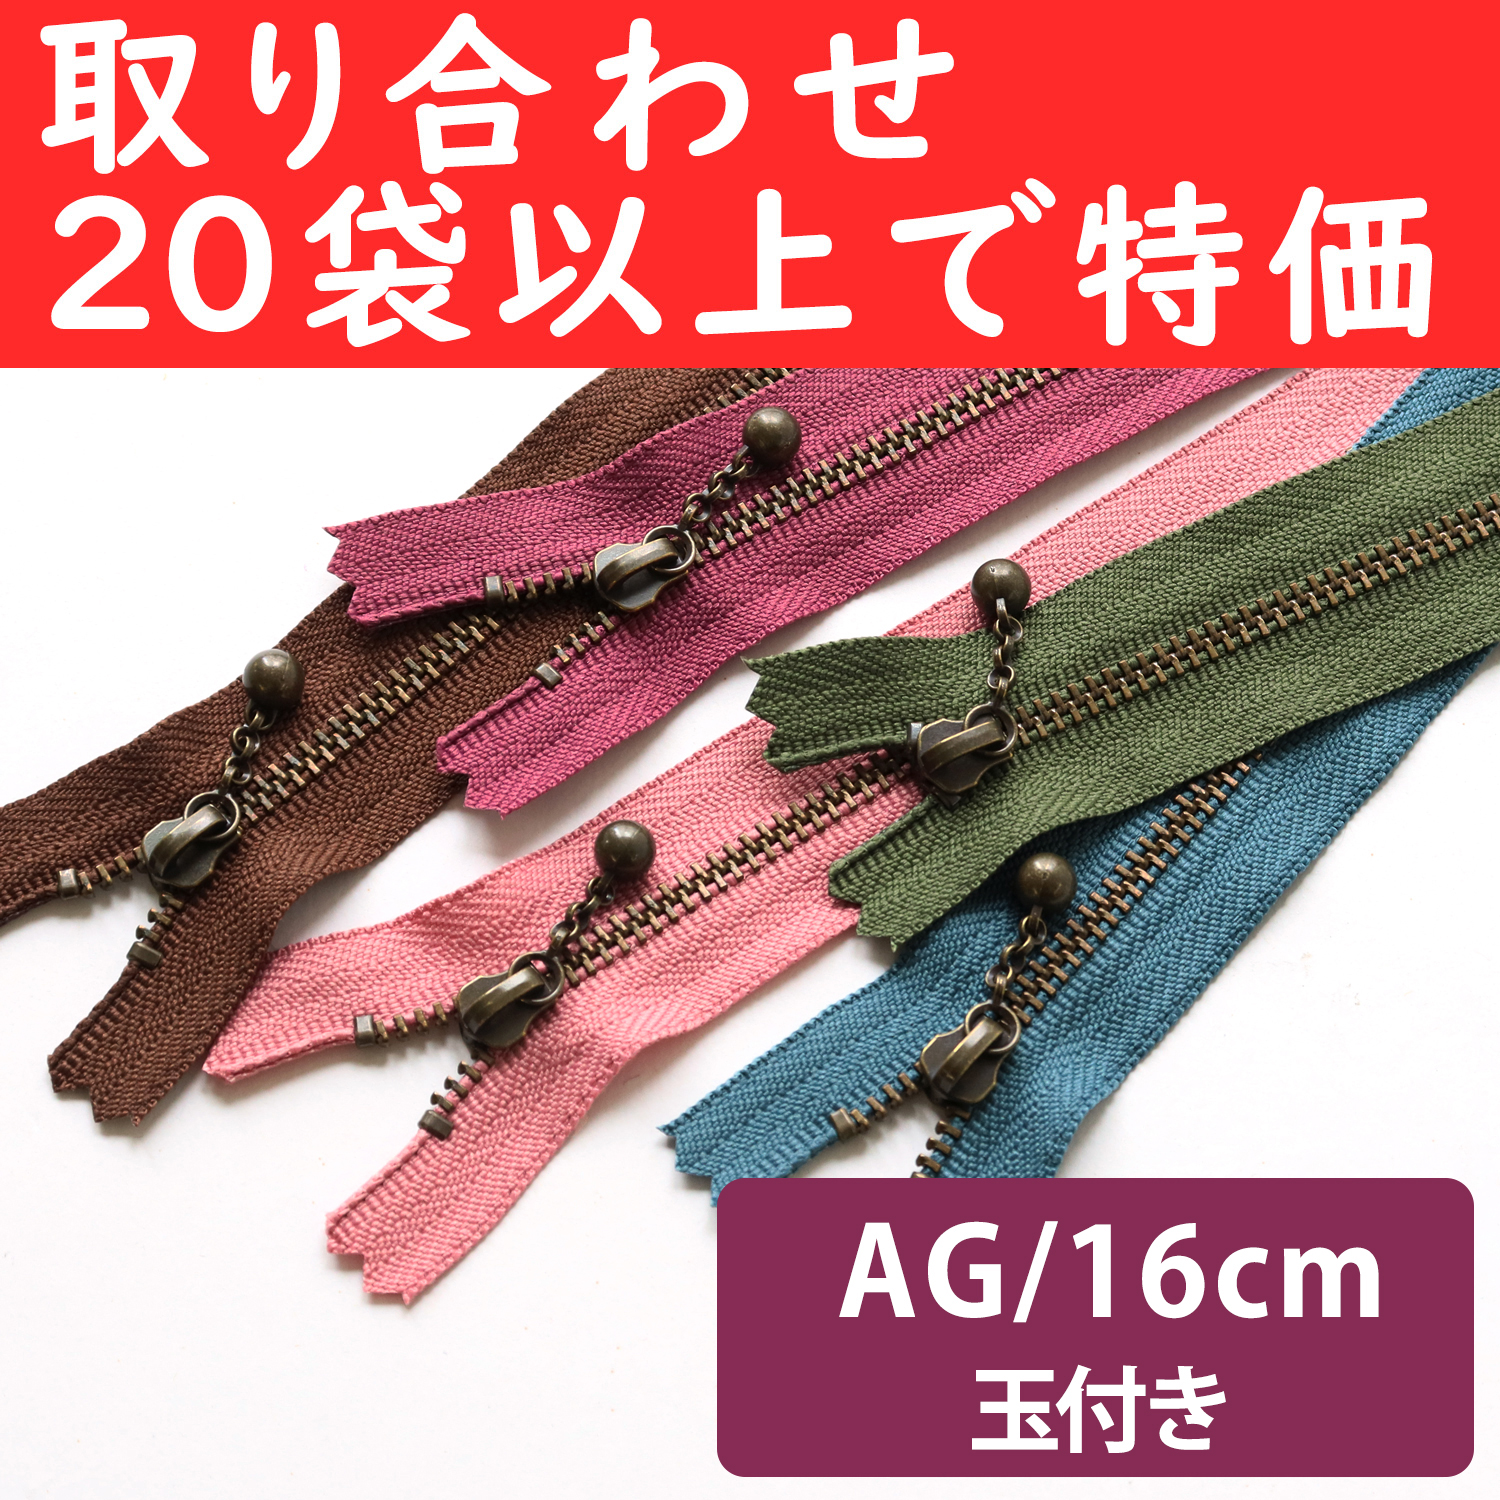 3GKB16-OVER200 Special)Ball Pull Zippers  AG 16cm ", orders with 20 bags or more (bag)